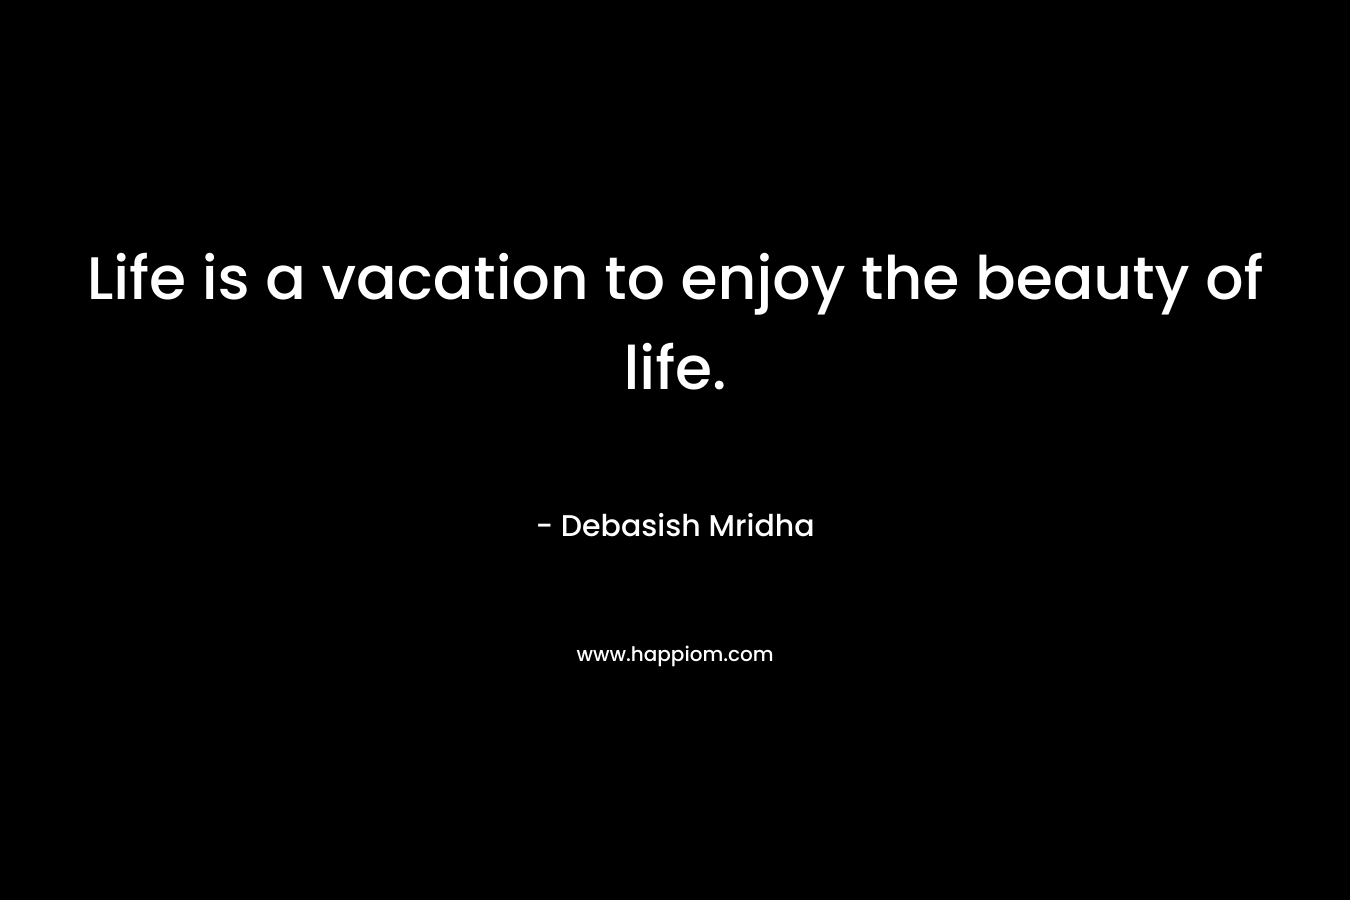 Life is a vacation to enjoy the beauty of life.